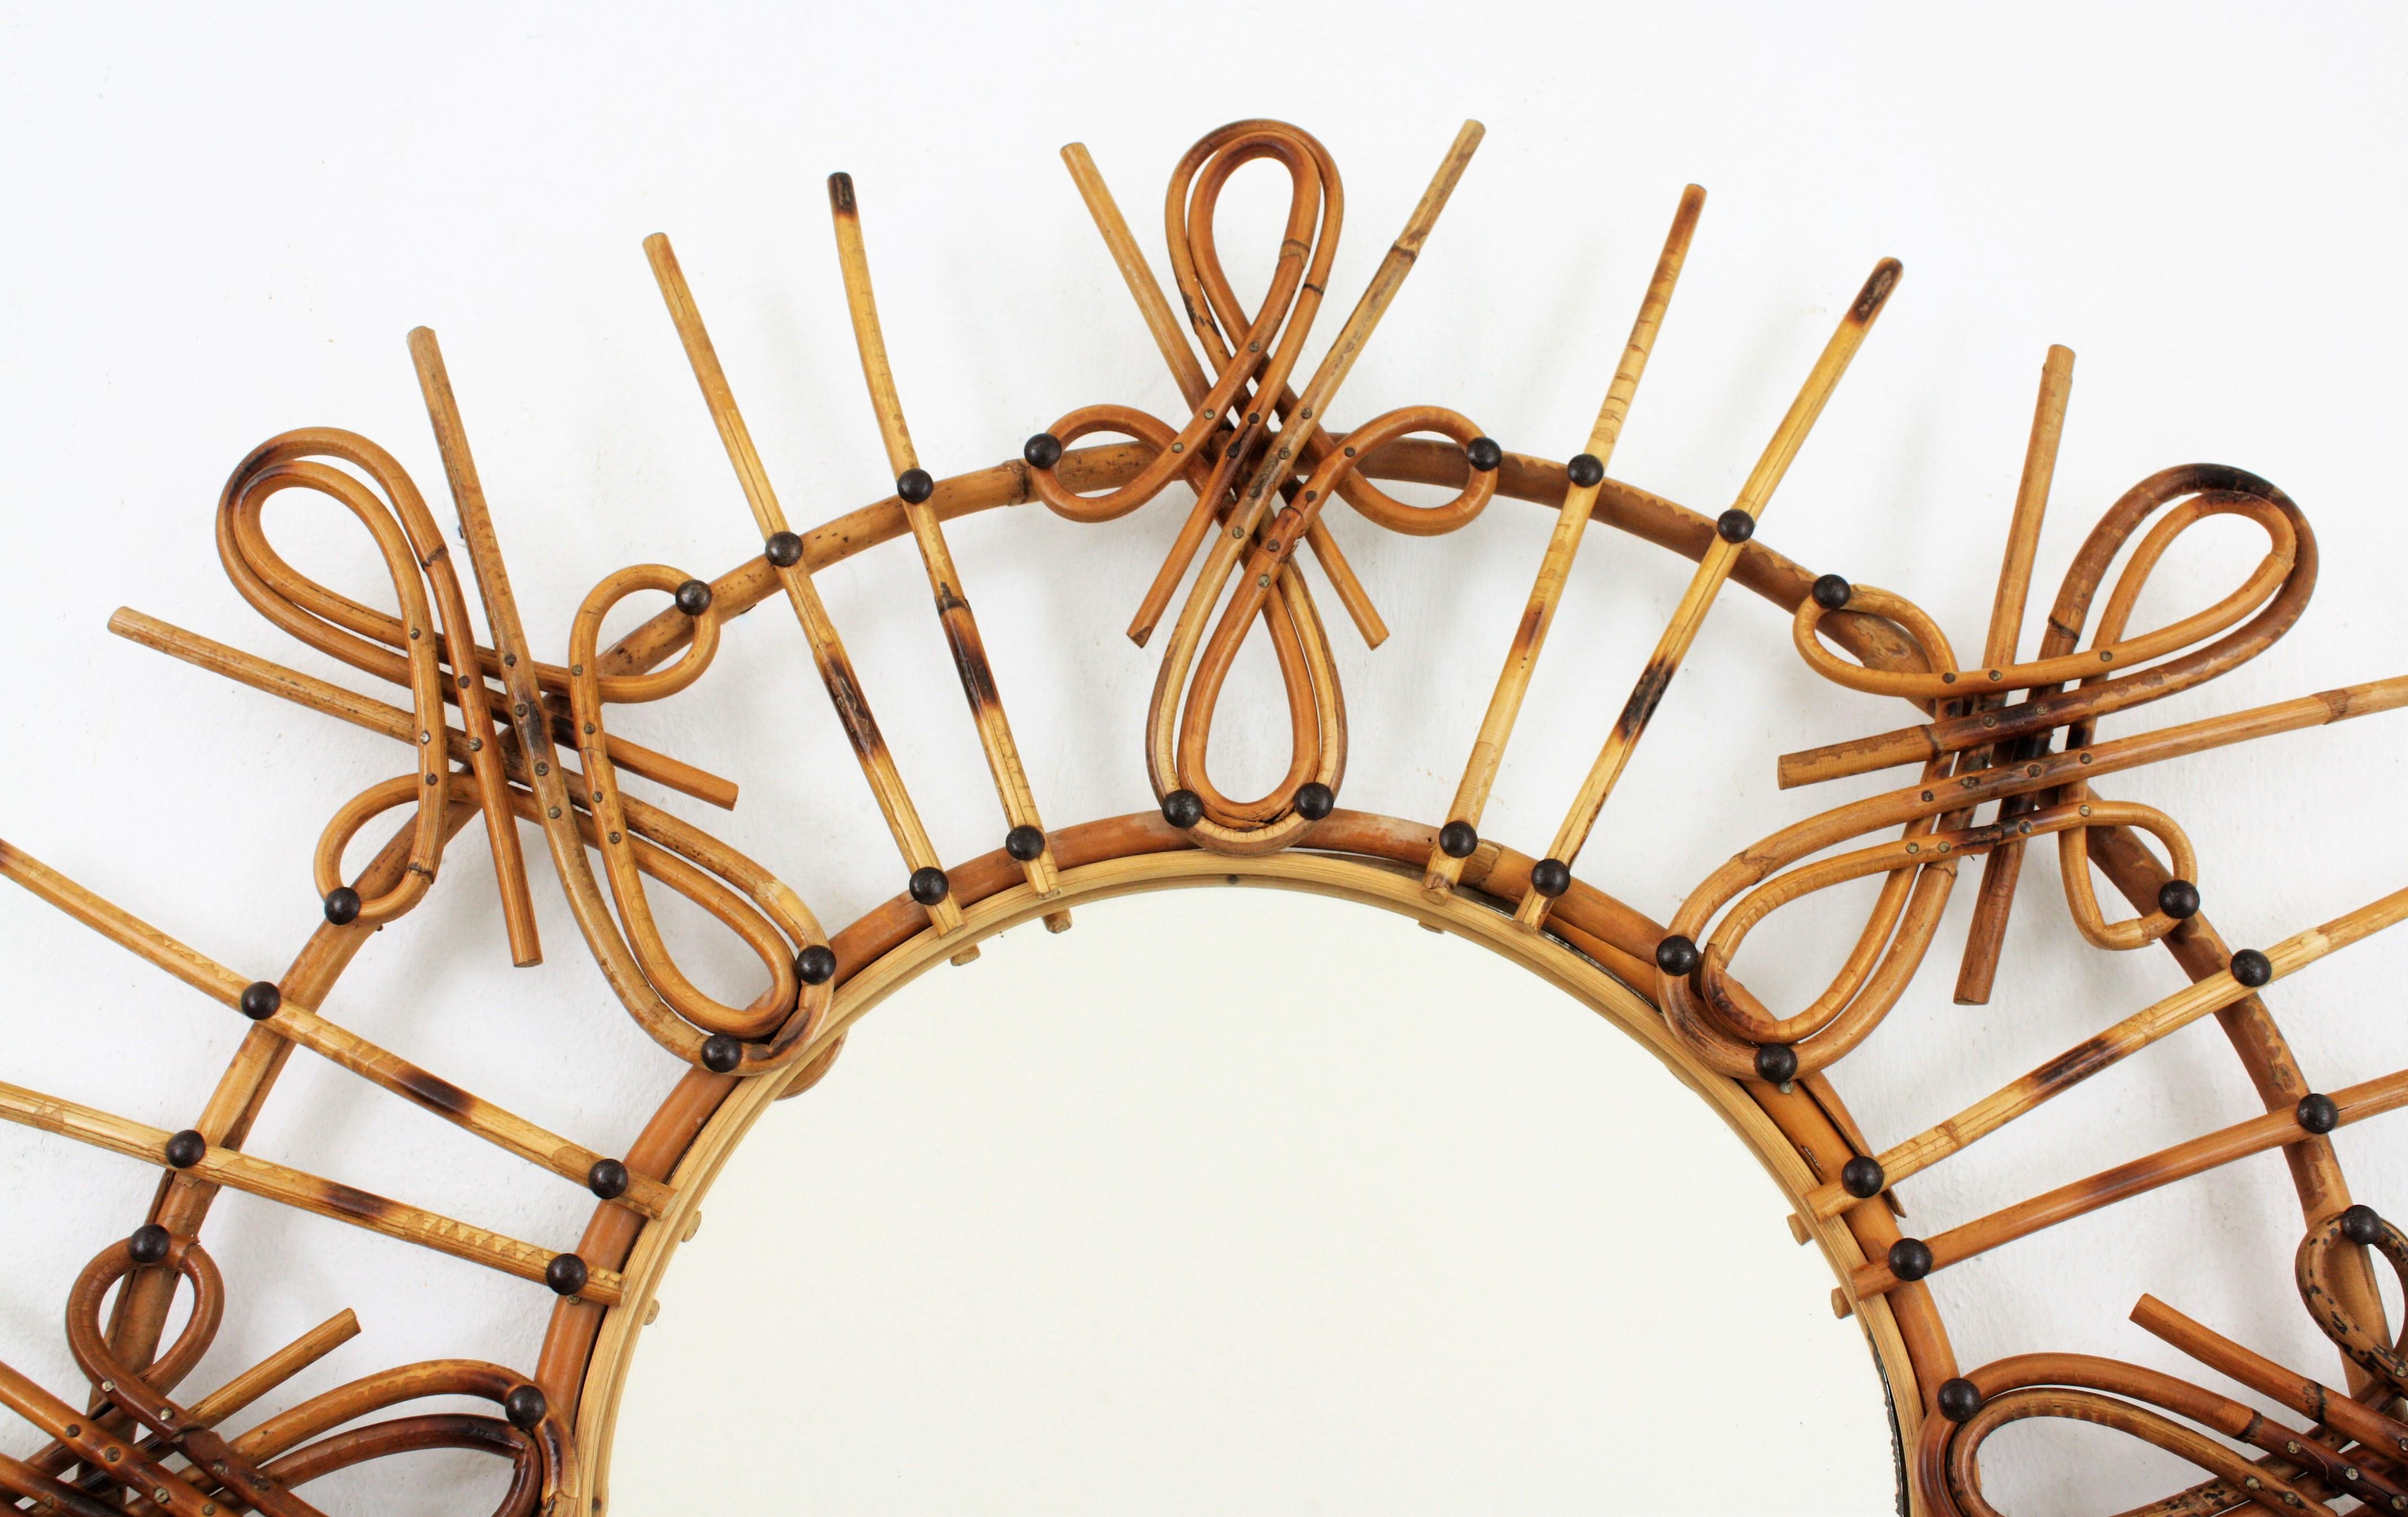 Rattan Sunburst Mirror with Chinoiserie Tiki Accents, Spain, 1950s For Sale 4